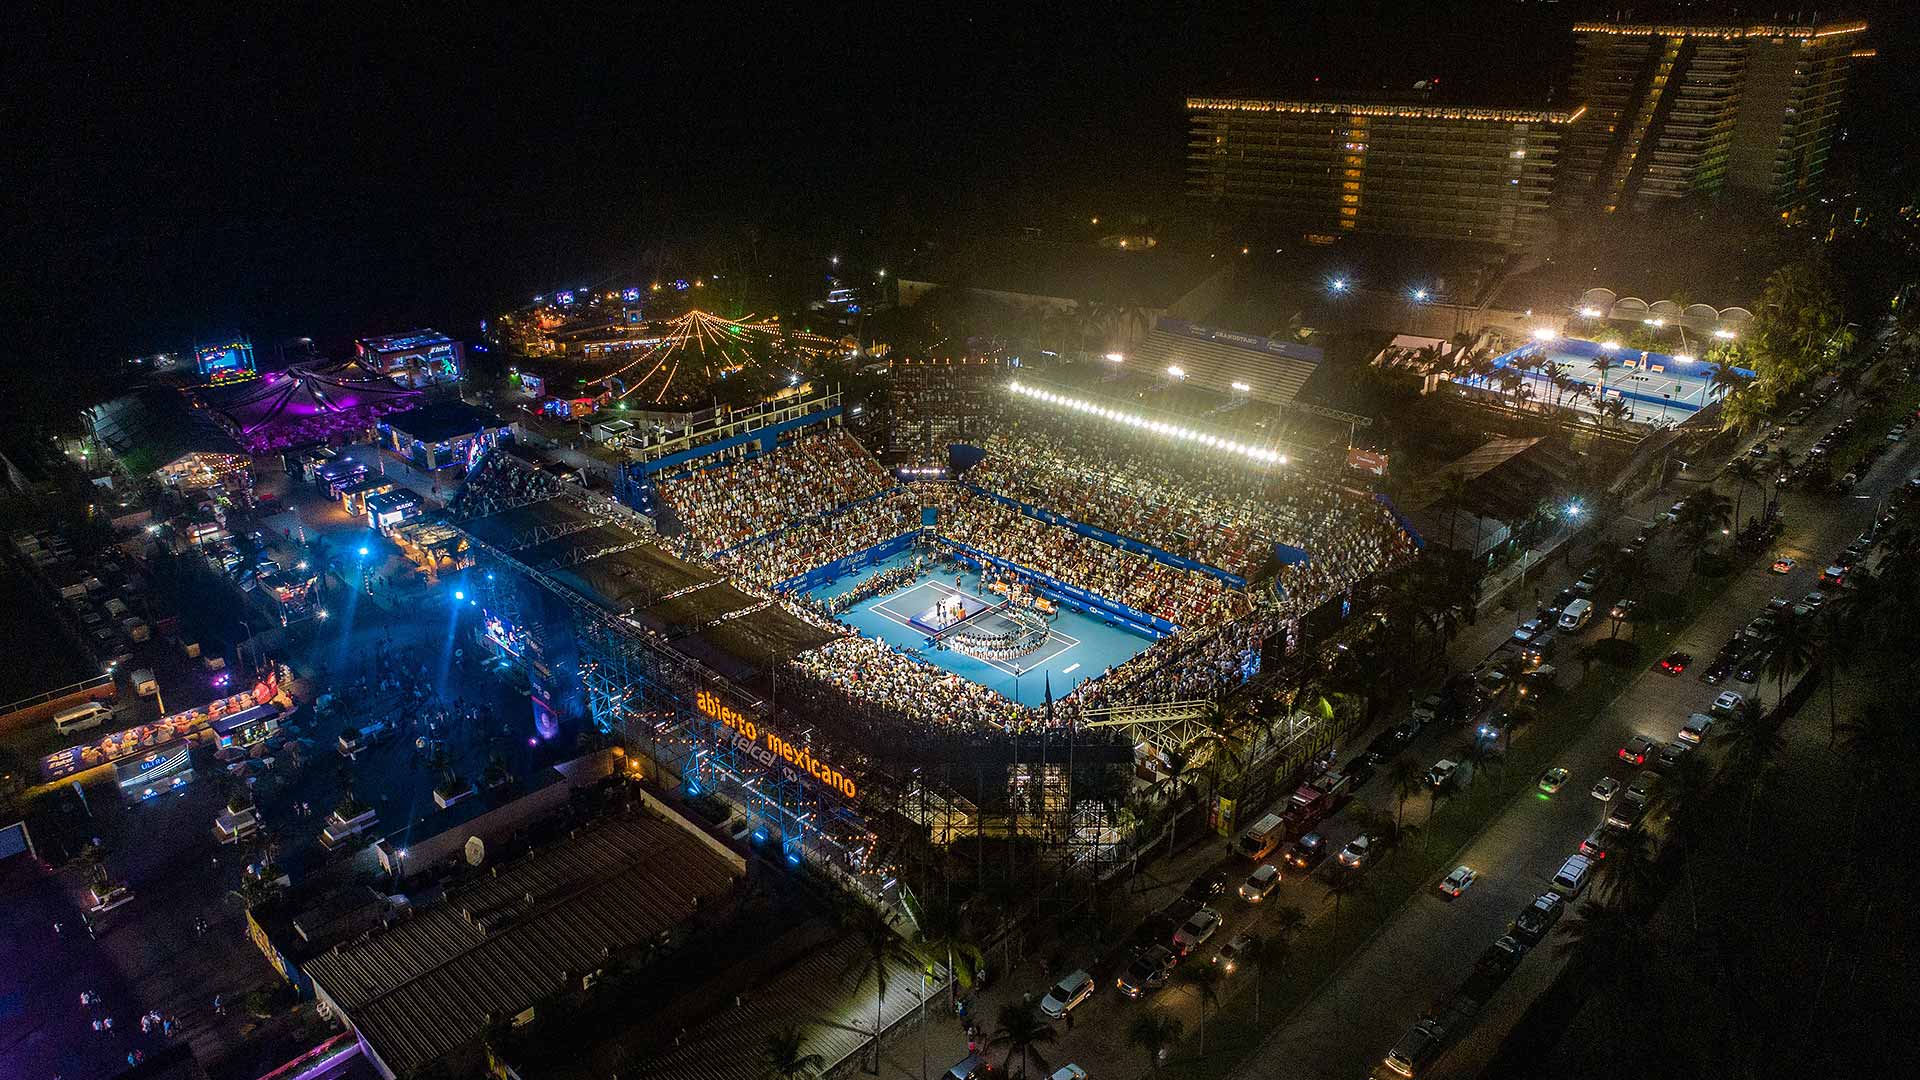 The <a href='https://www.atptour.com/en/tournaments/acapulco/807/overview'>Abierto Mexicano Telcel presentado por HSBC</a> in Acapulco has been selected by players as the ATP 500 Tournament of the Year in the 2019 ATP Awards.